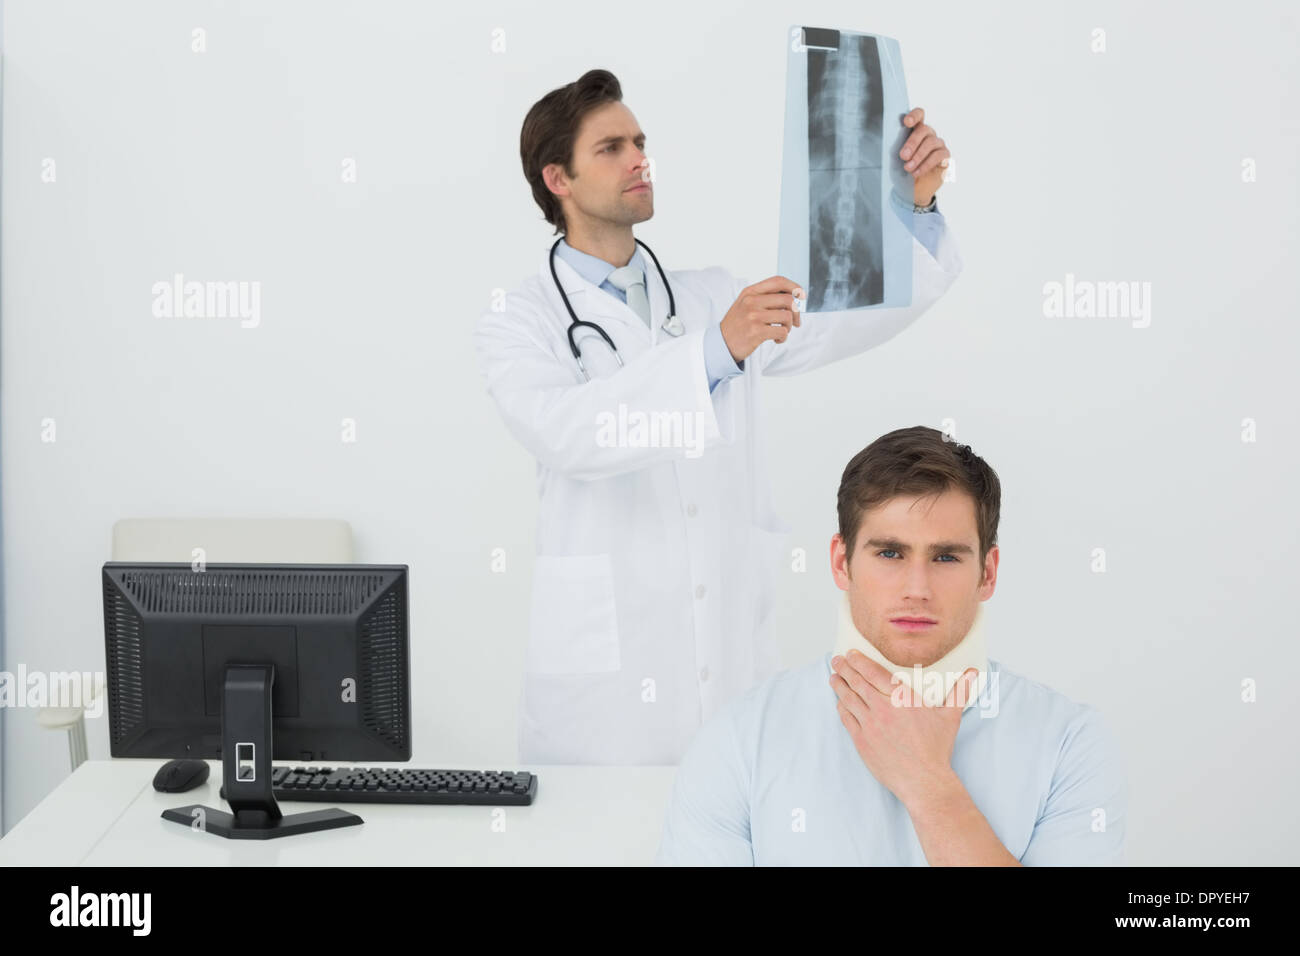 Patient in surgical collar while doctor examining spine x-ray behind Stock Photo